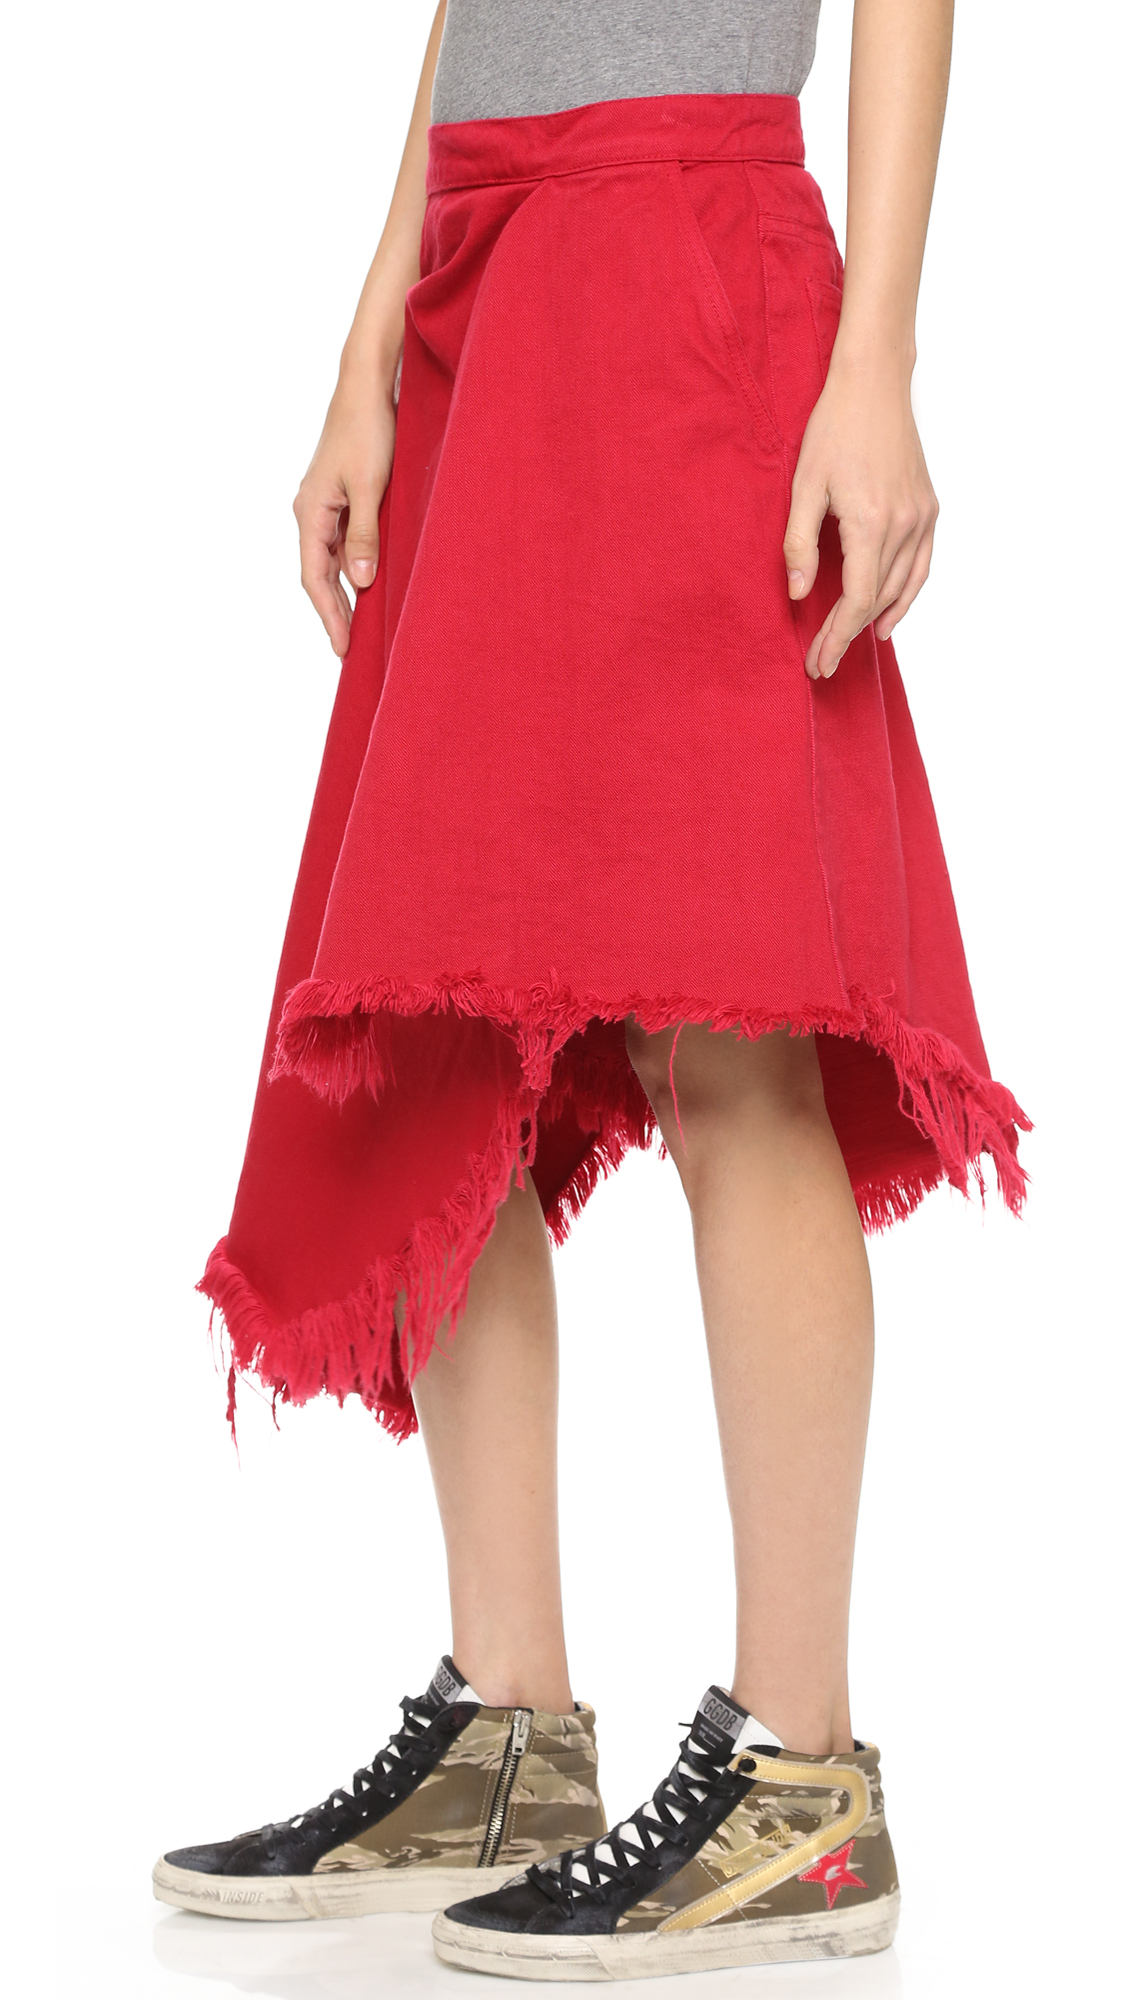 Lyst - Marques'Almeida Deconstructed Draped Skirt - Indigo in Red